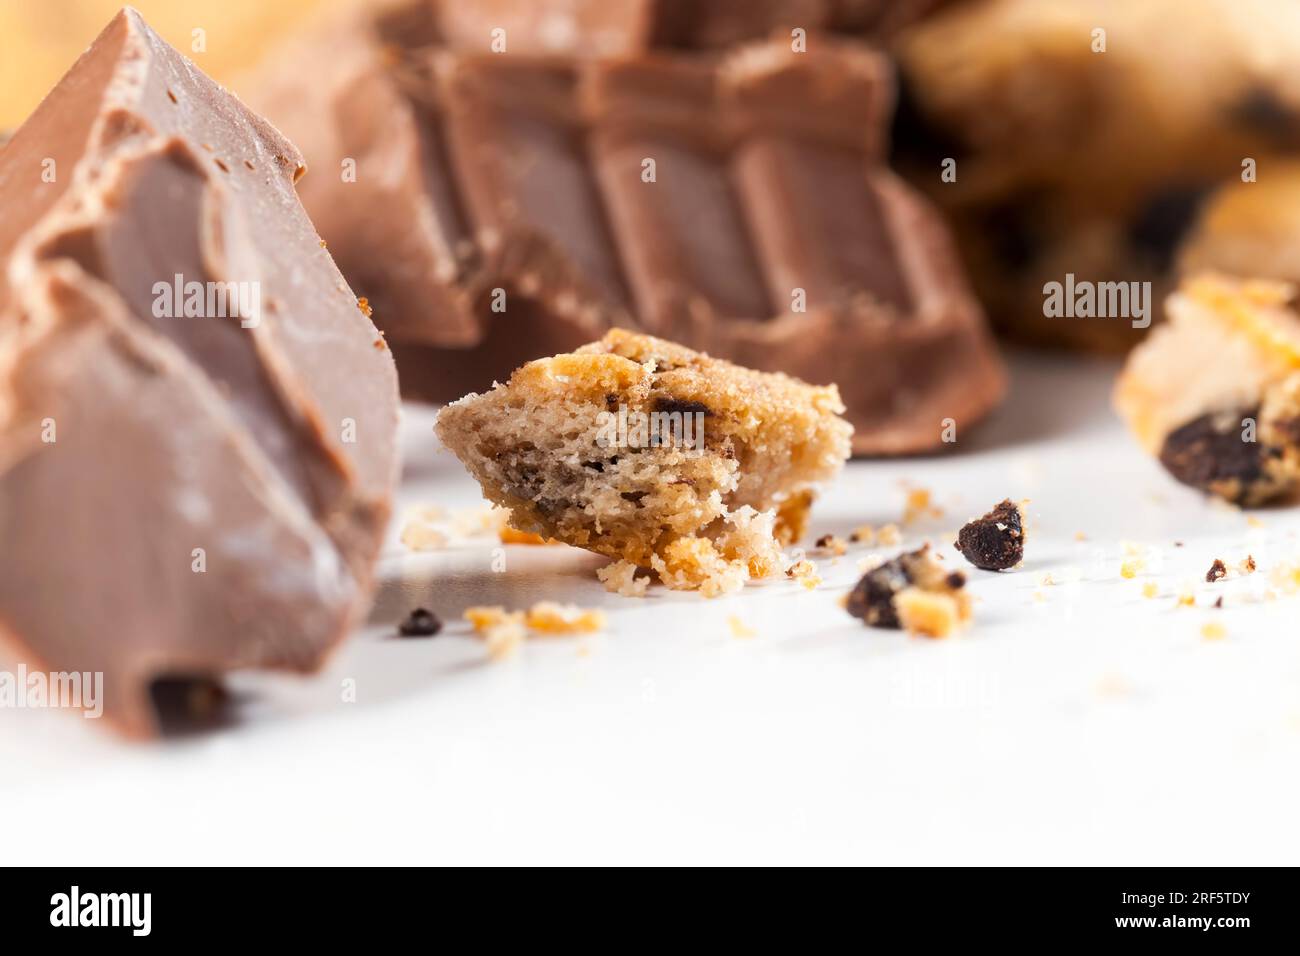 broken wheat flour cookies and large pieces of sweet chocolate together, cookies with chocolate pieces inside, closeup food for desserts crumbled cook Stock Photo